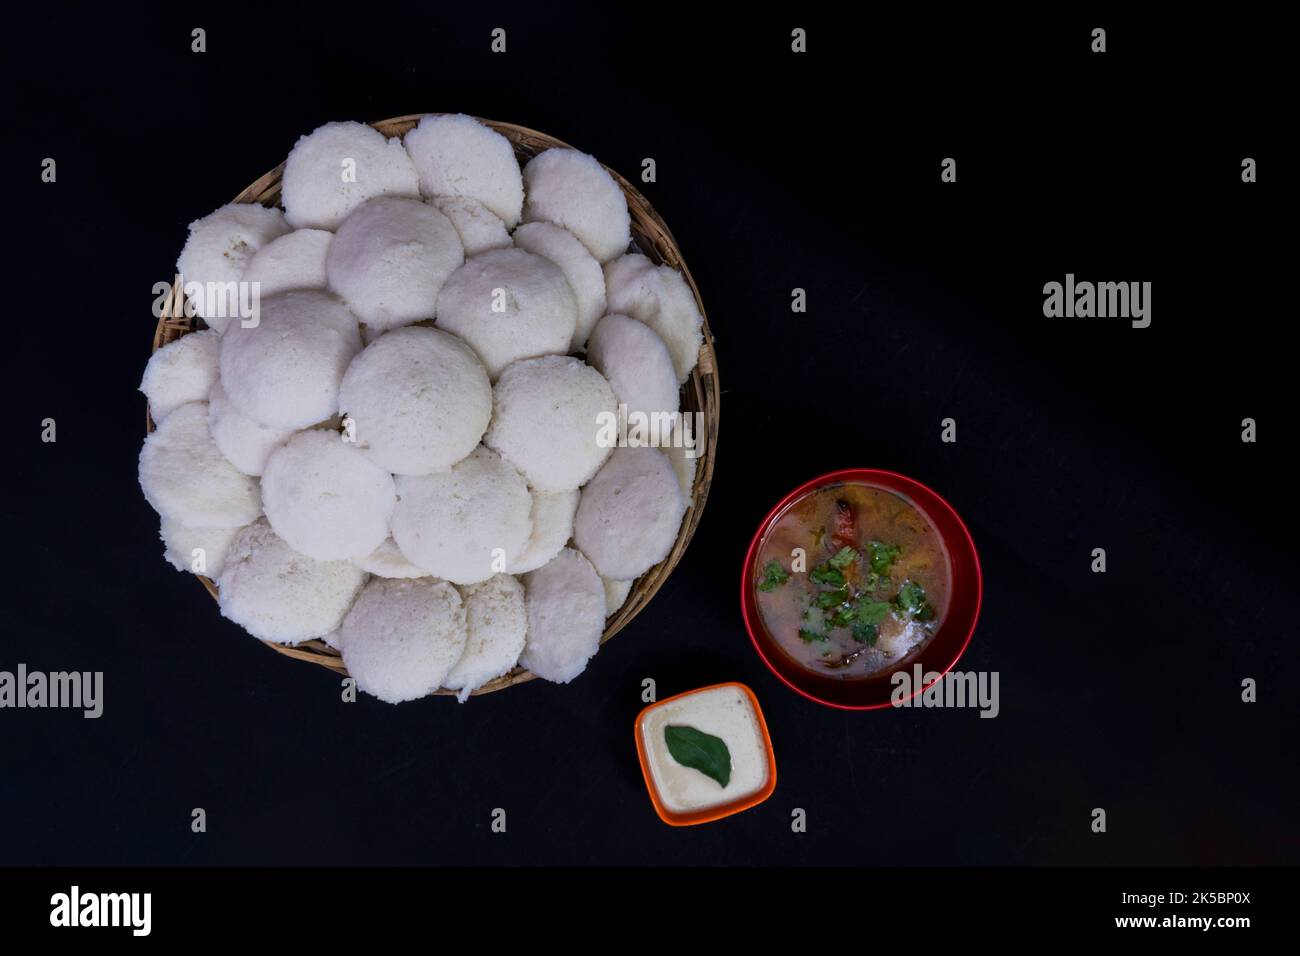 South Indian Breakfast, Idly In Stick Bowl Sambar with Coconut Chutney, Isolated On Black Background, Idly In Stick Bowl, Sambar In Red Round Bowl Stock Photo